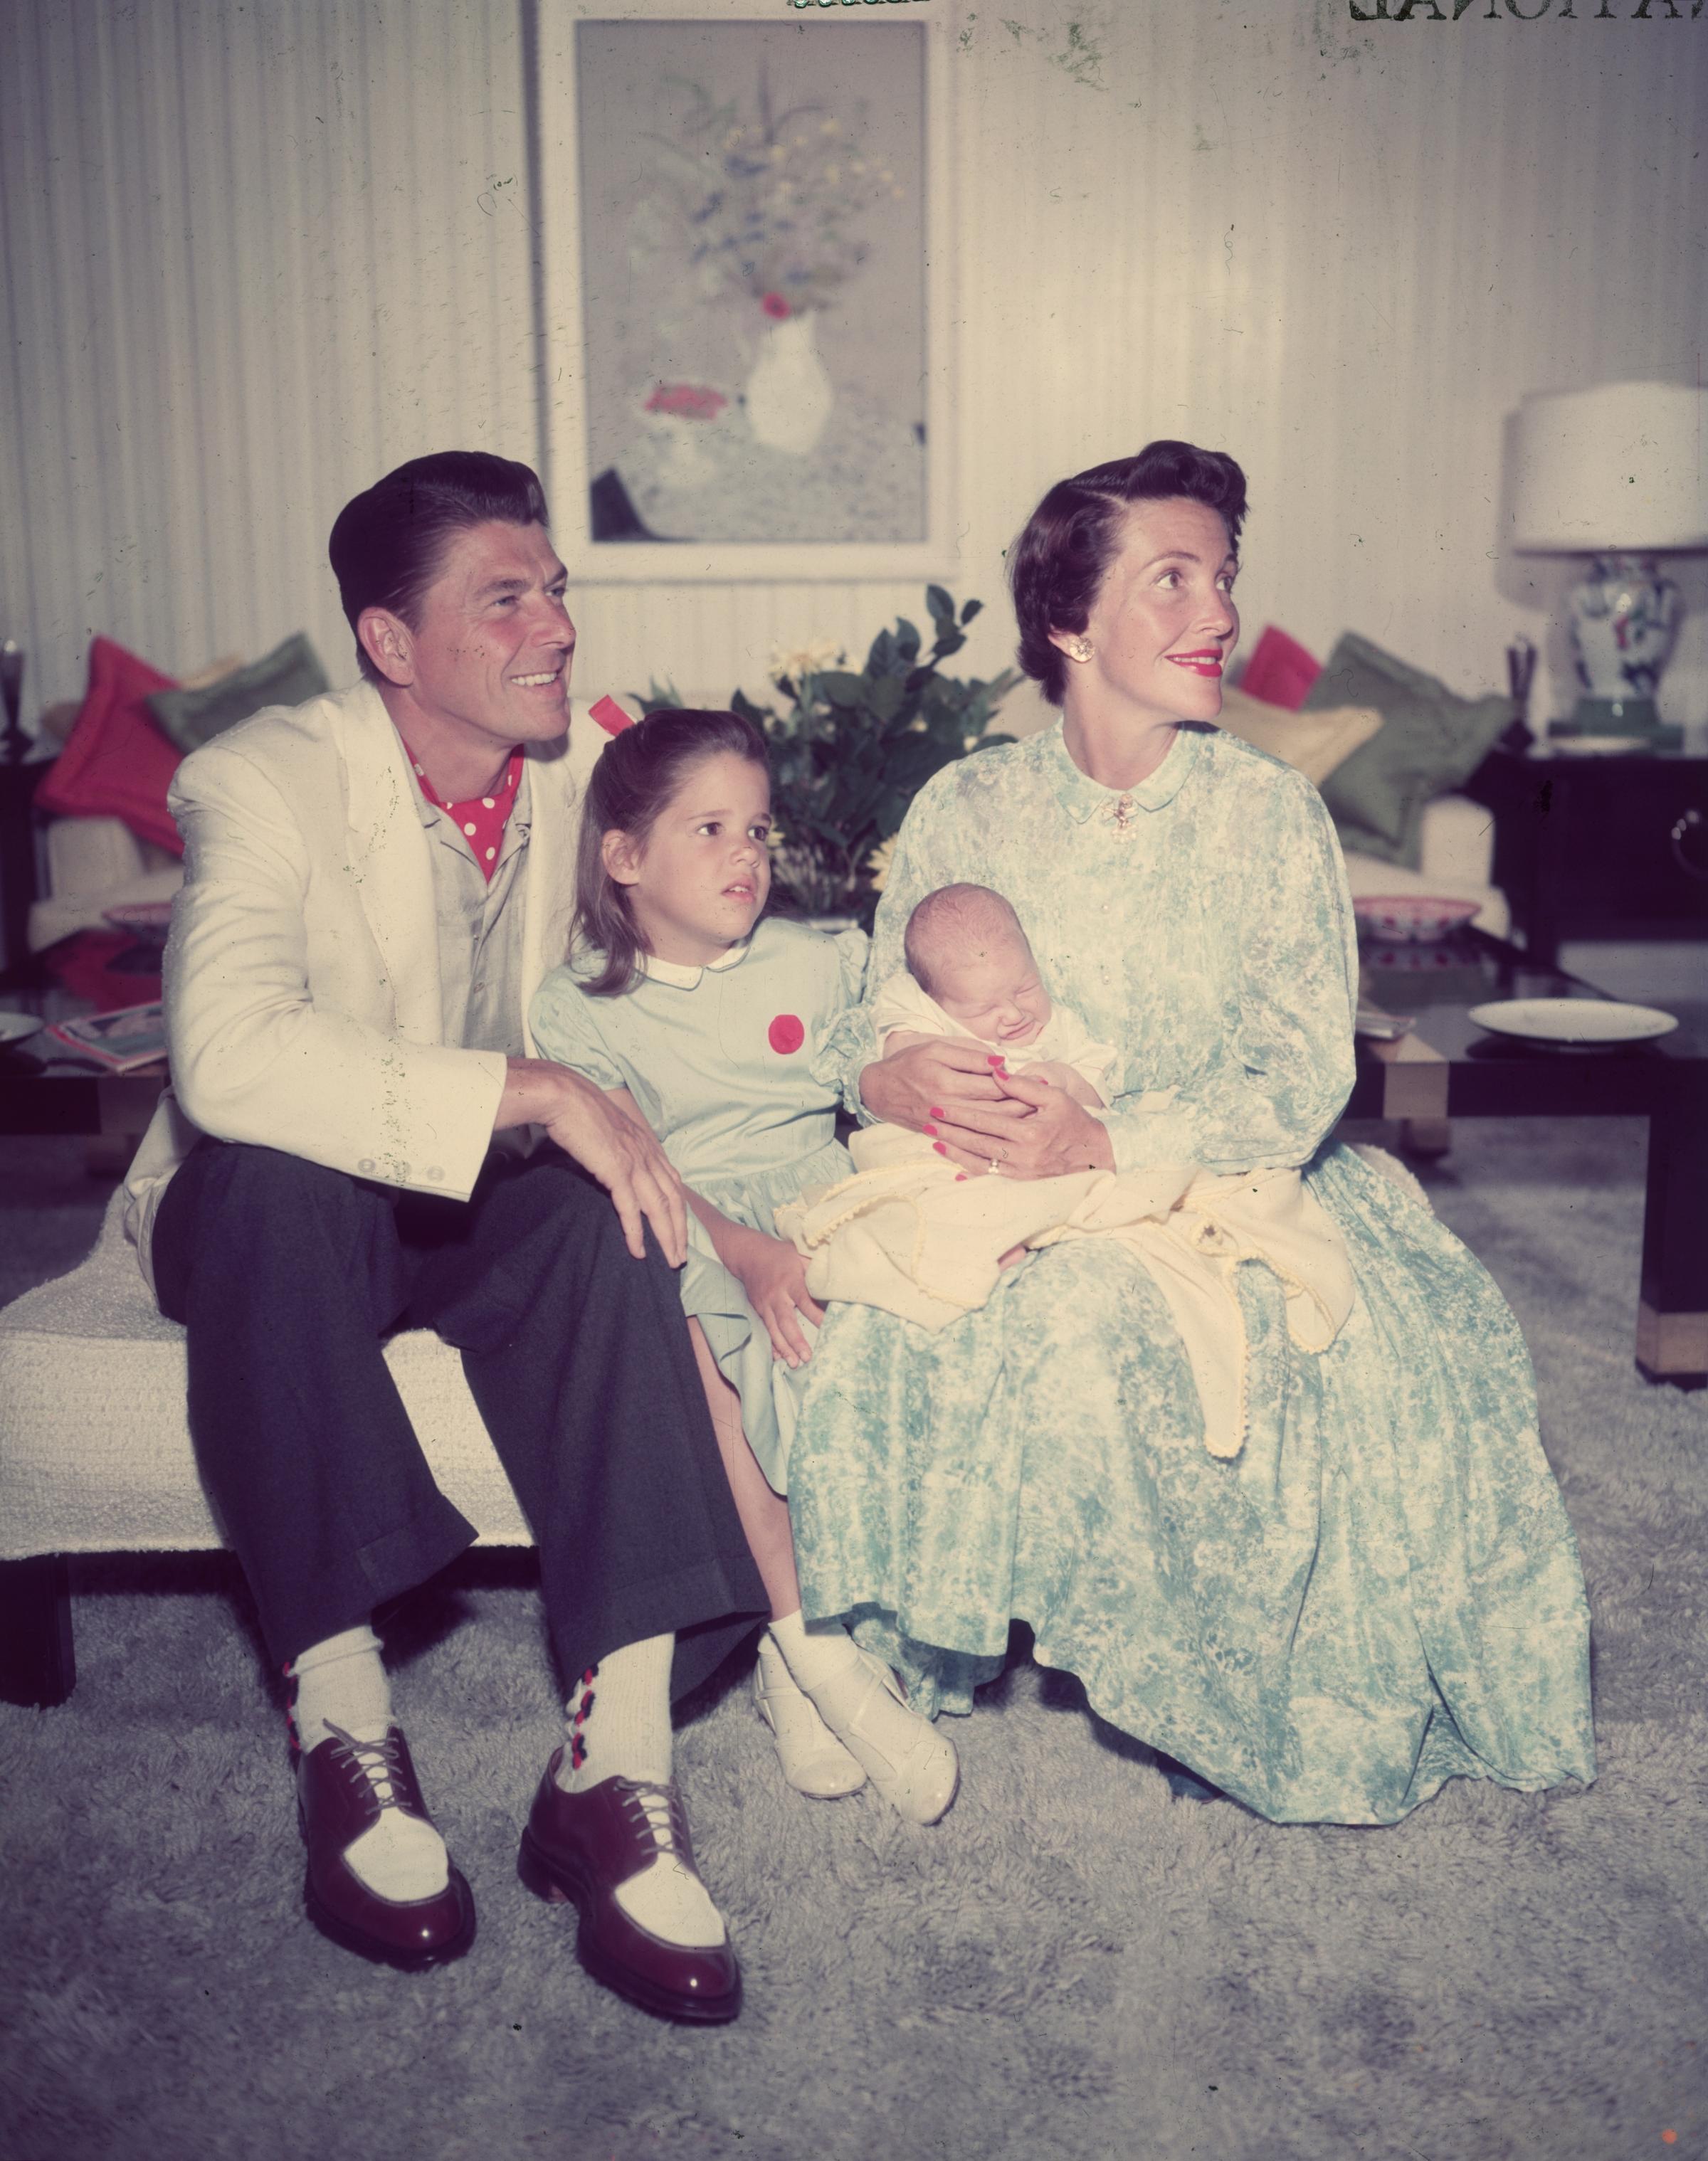 Family The Reagans had two children, Patricia Ann, next to Ron in this picture, and Ron Jr. Nancy's relationship with her daughter, who, as an actress, would take the professional name Patti Davis, became rocky later in their lives, as the younger Reagan refused to accept all of her parents' conservative views. Ronald Reagan also had one biological child, Maureen and one adopted child, Michael, from his previous marriage to Jane Wyman.